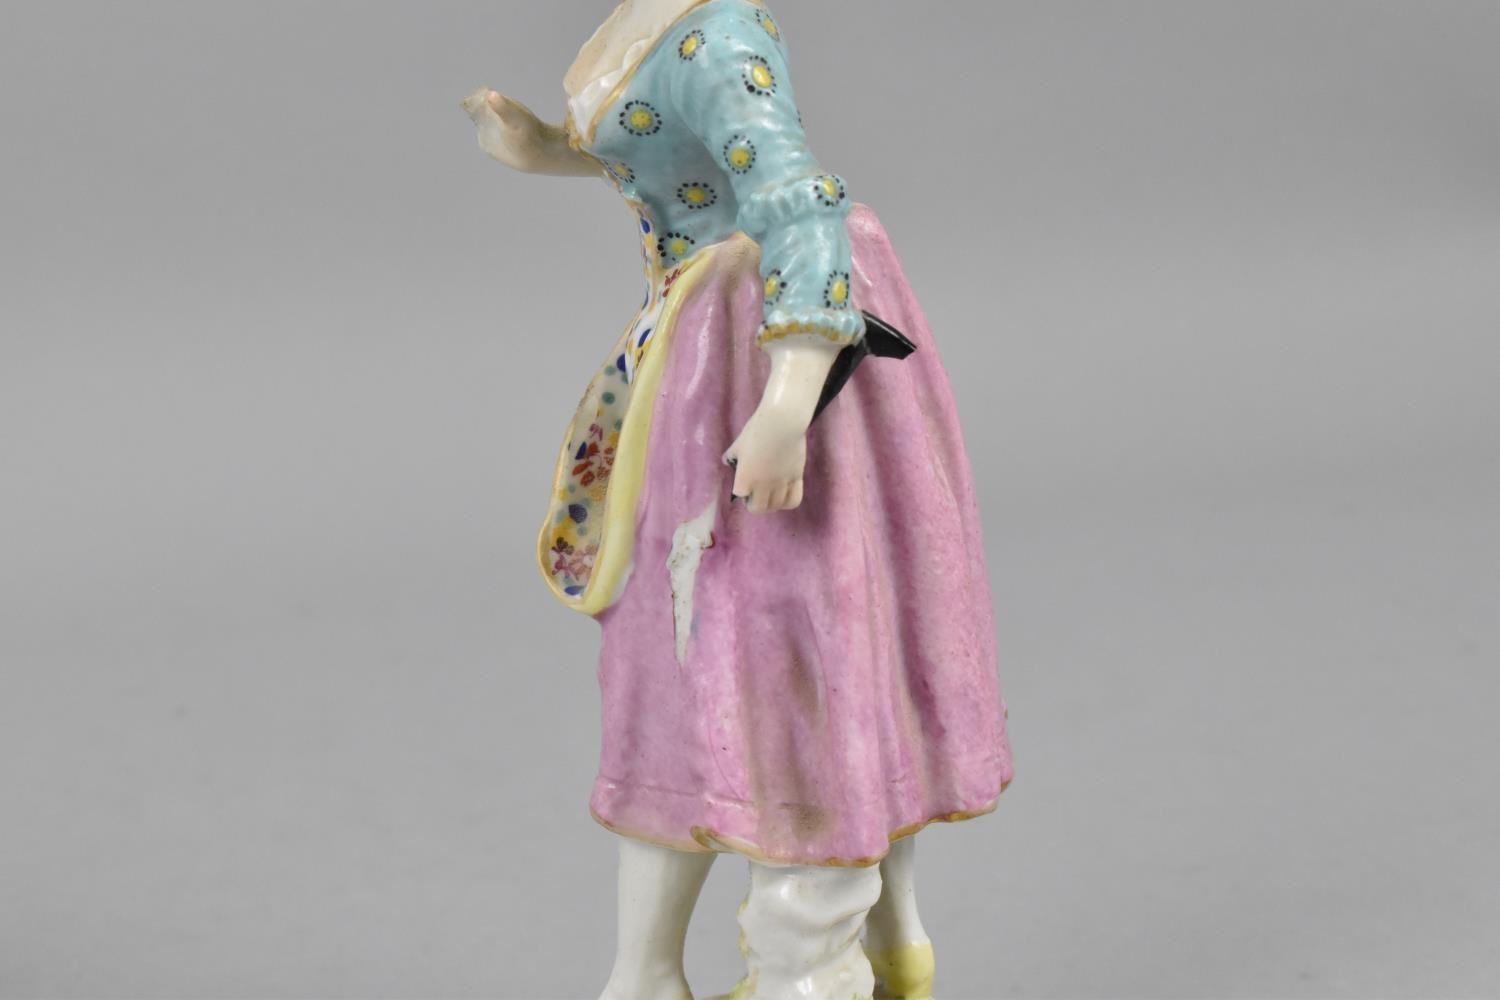 Two early 19th century Royal Crown Derby figures, one modelled as an allegorical figure with crown - Image 5 of 5